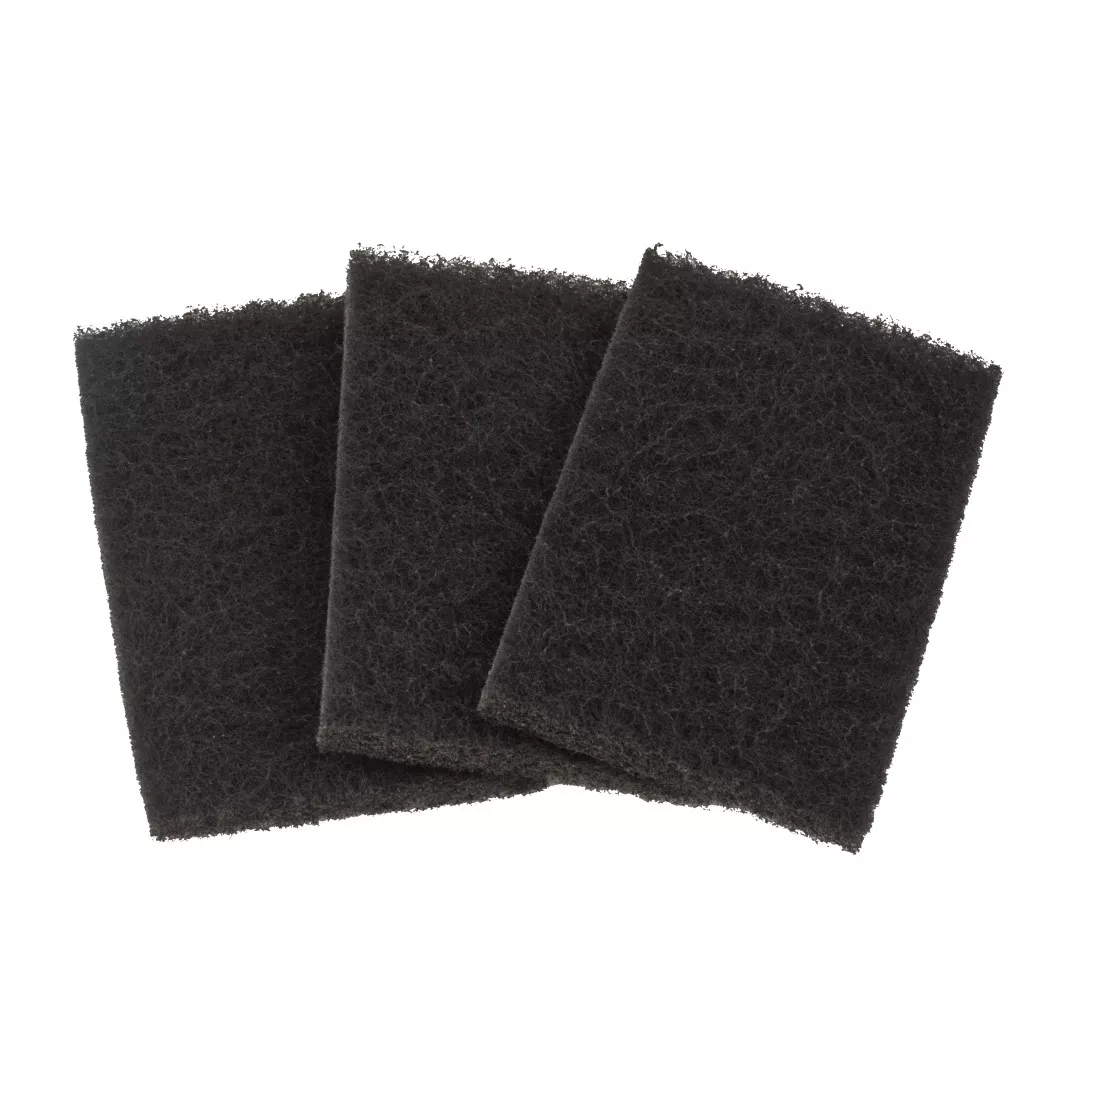 3M™ Kitchen Cleaning Pad 35-BLK, Black, 3 in x 5 in x 0.4 in, 60/Case,
Restricted